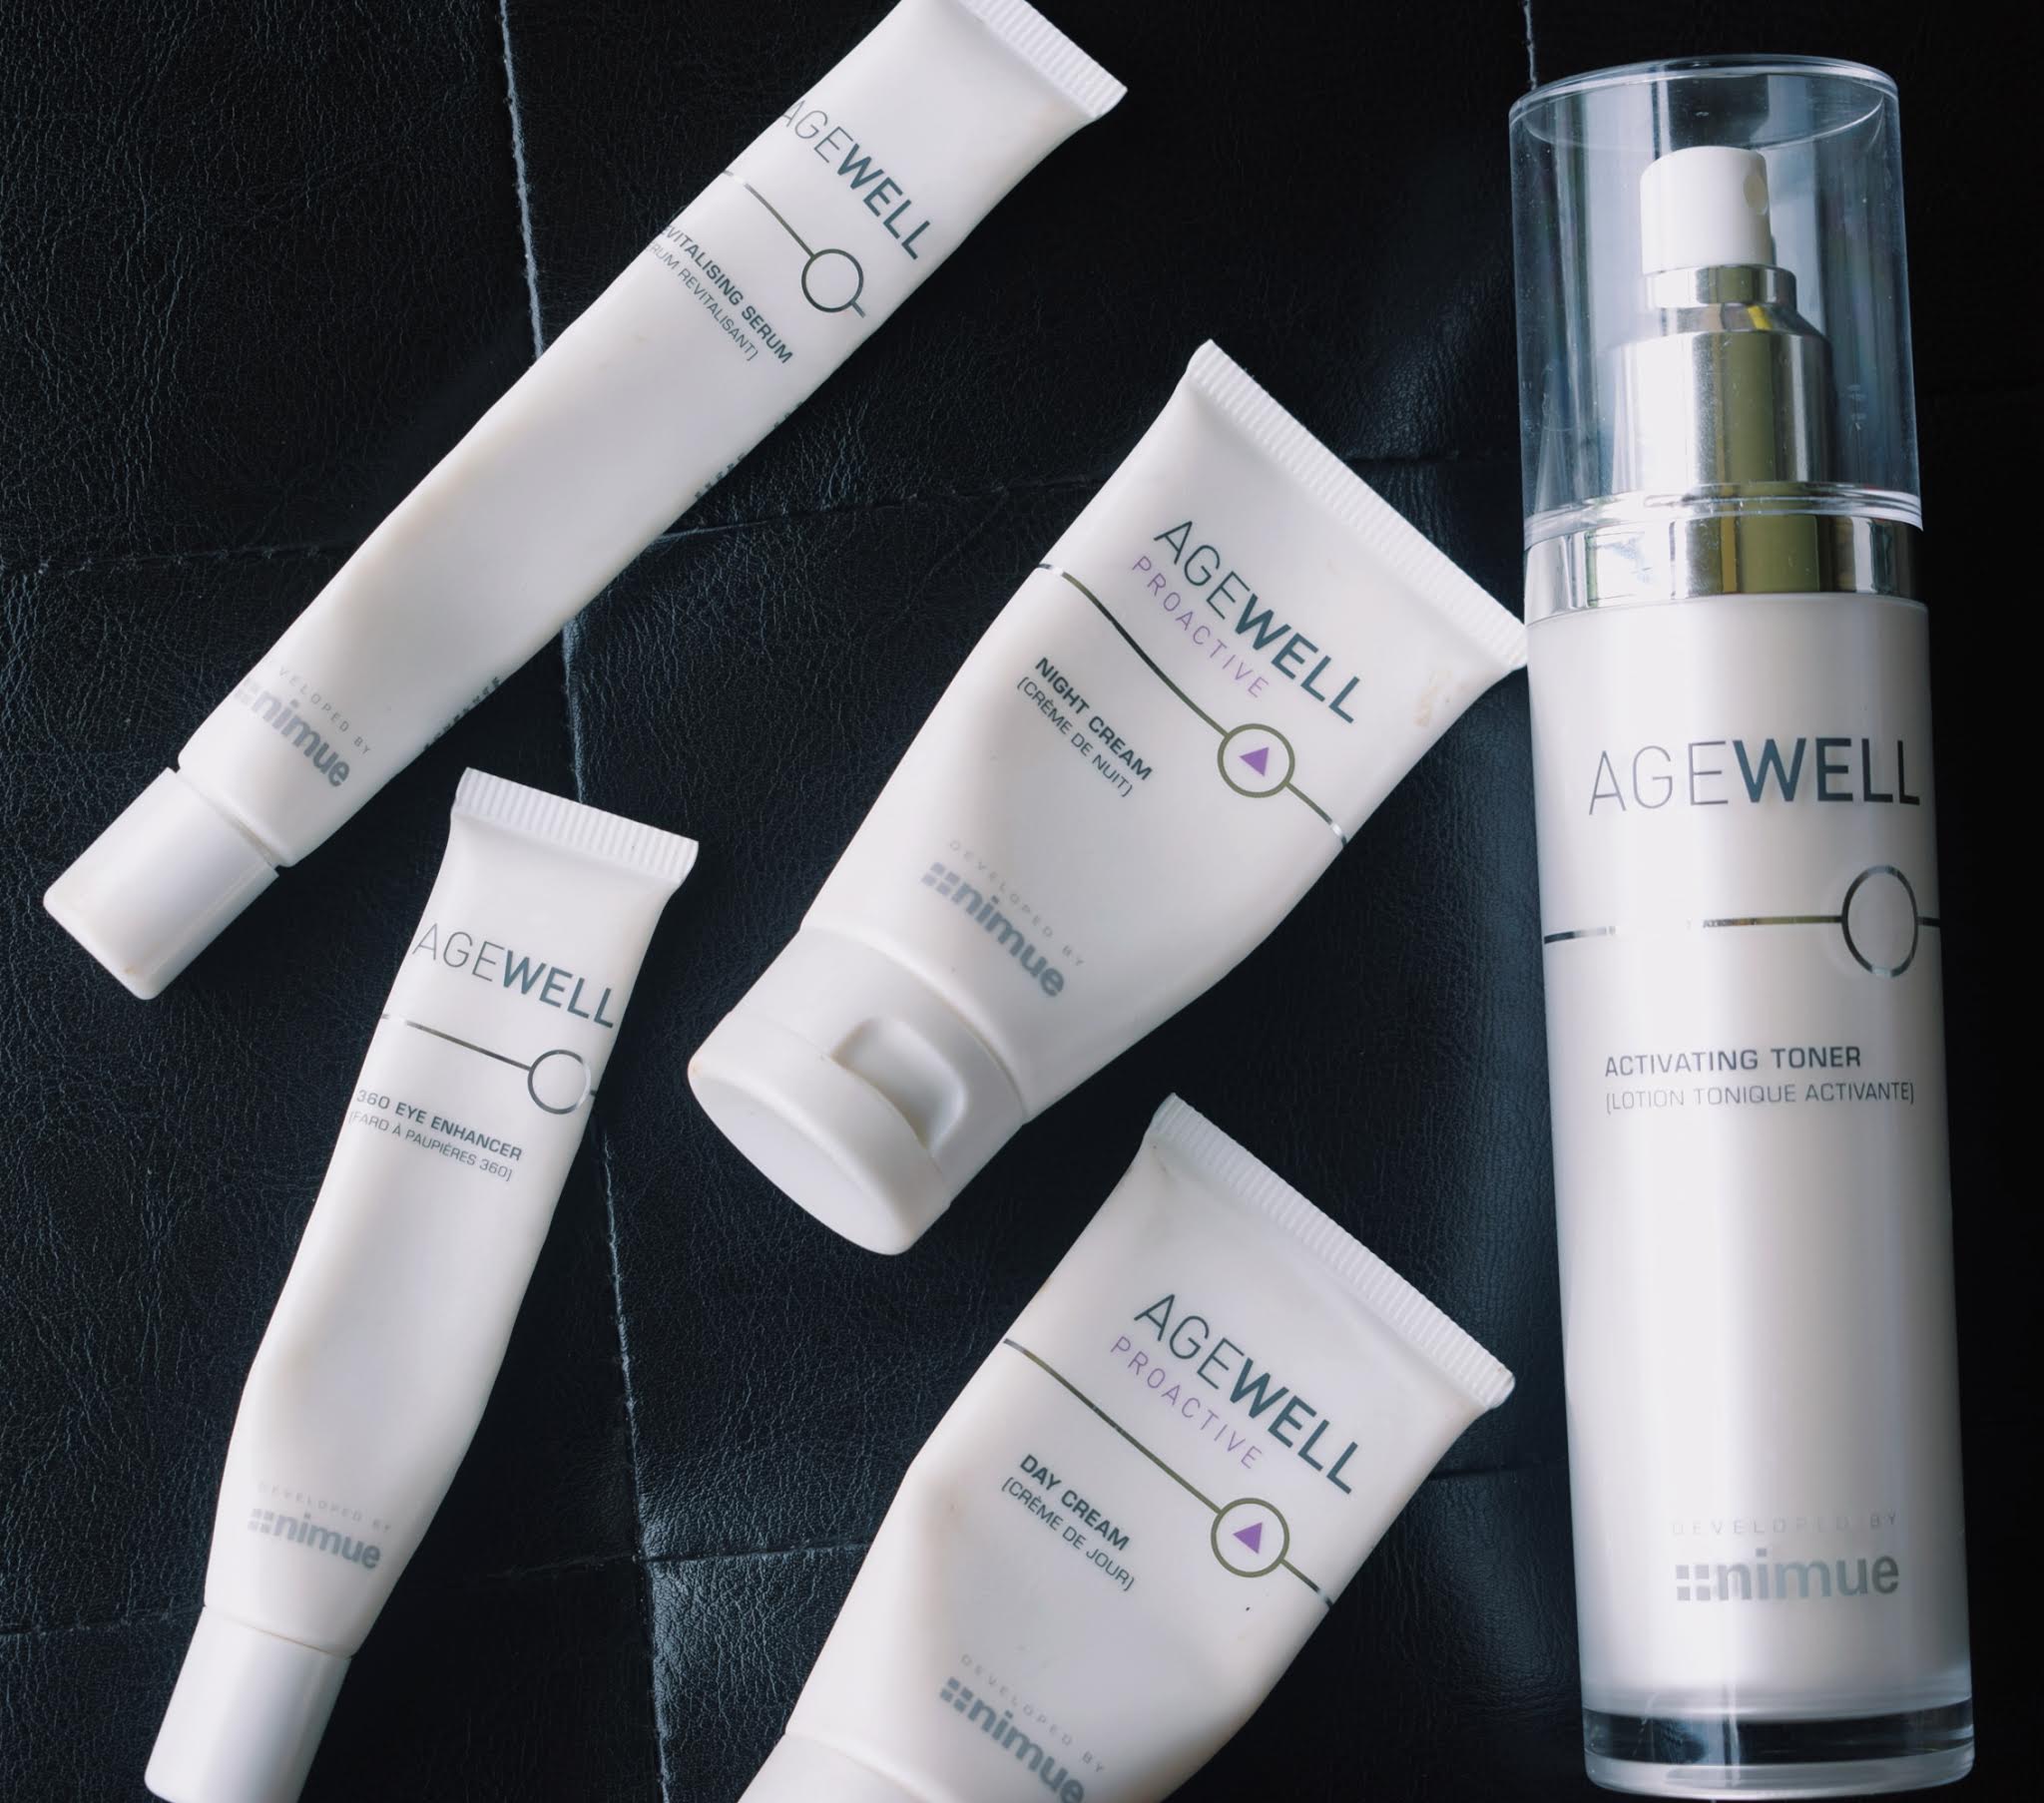 Agewell, best affordable skin care products south africa